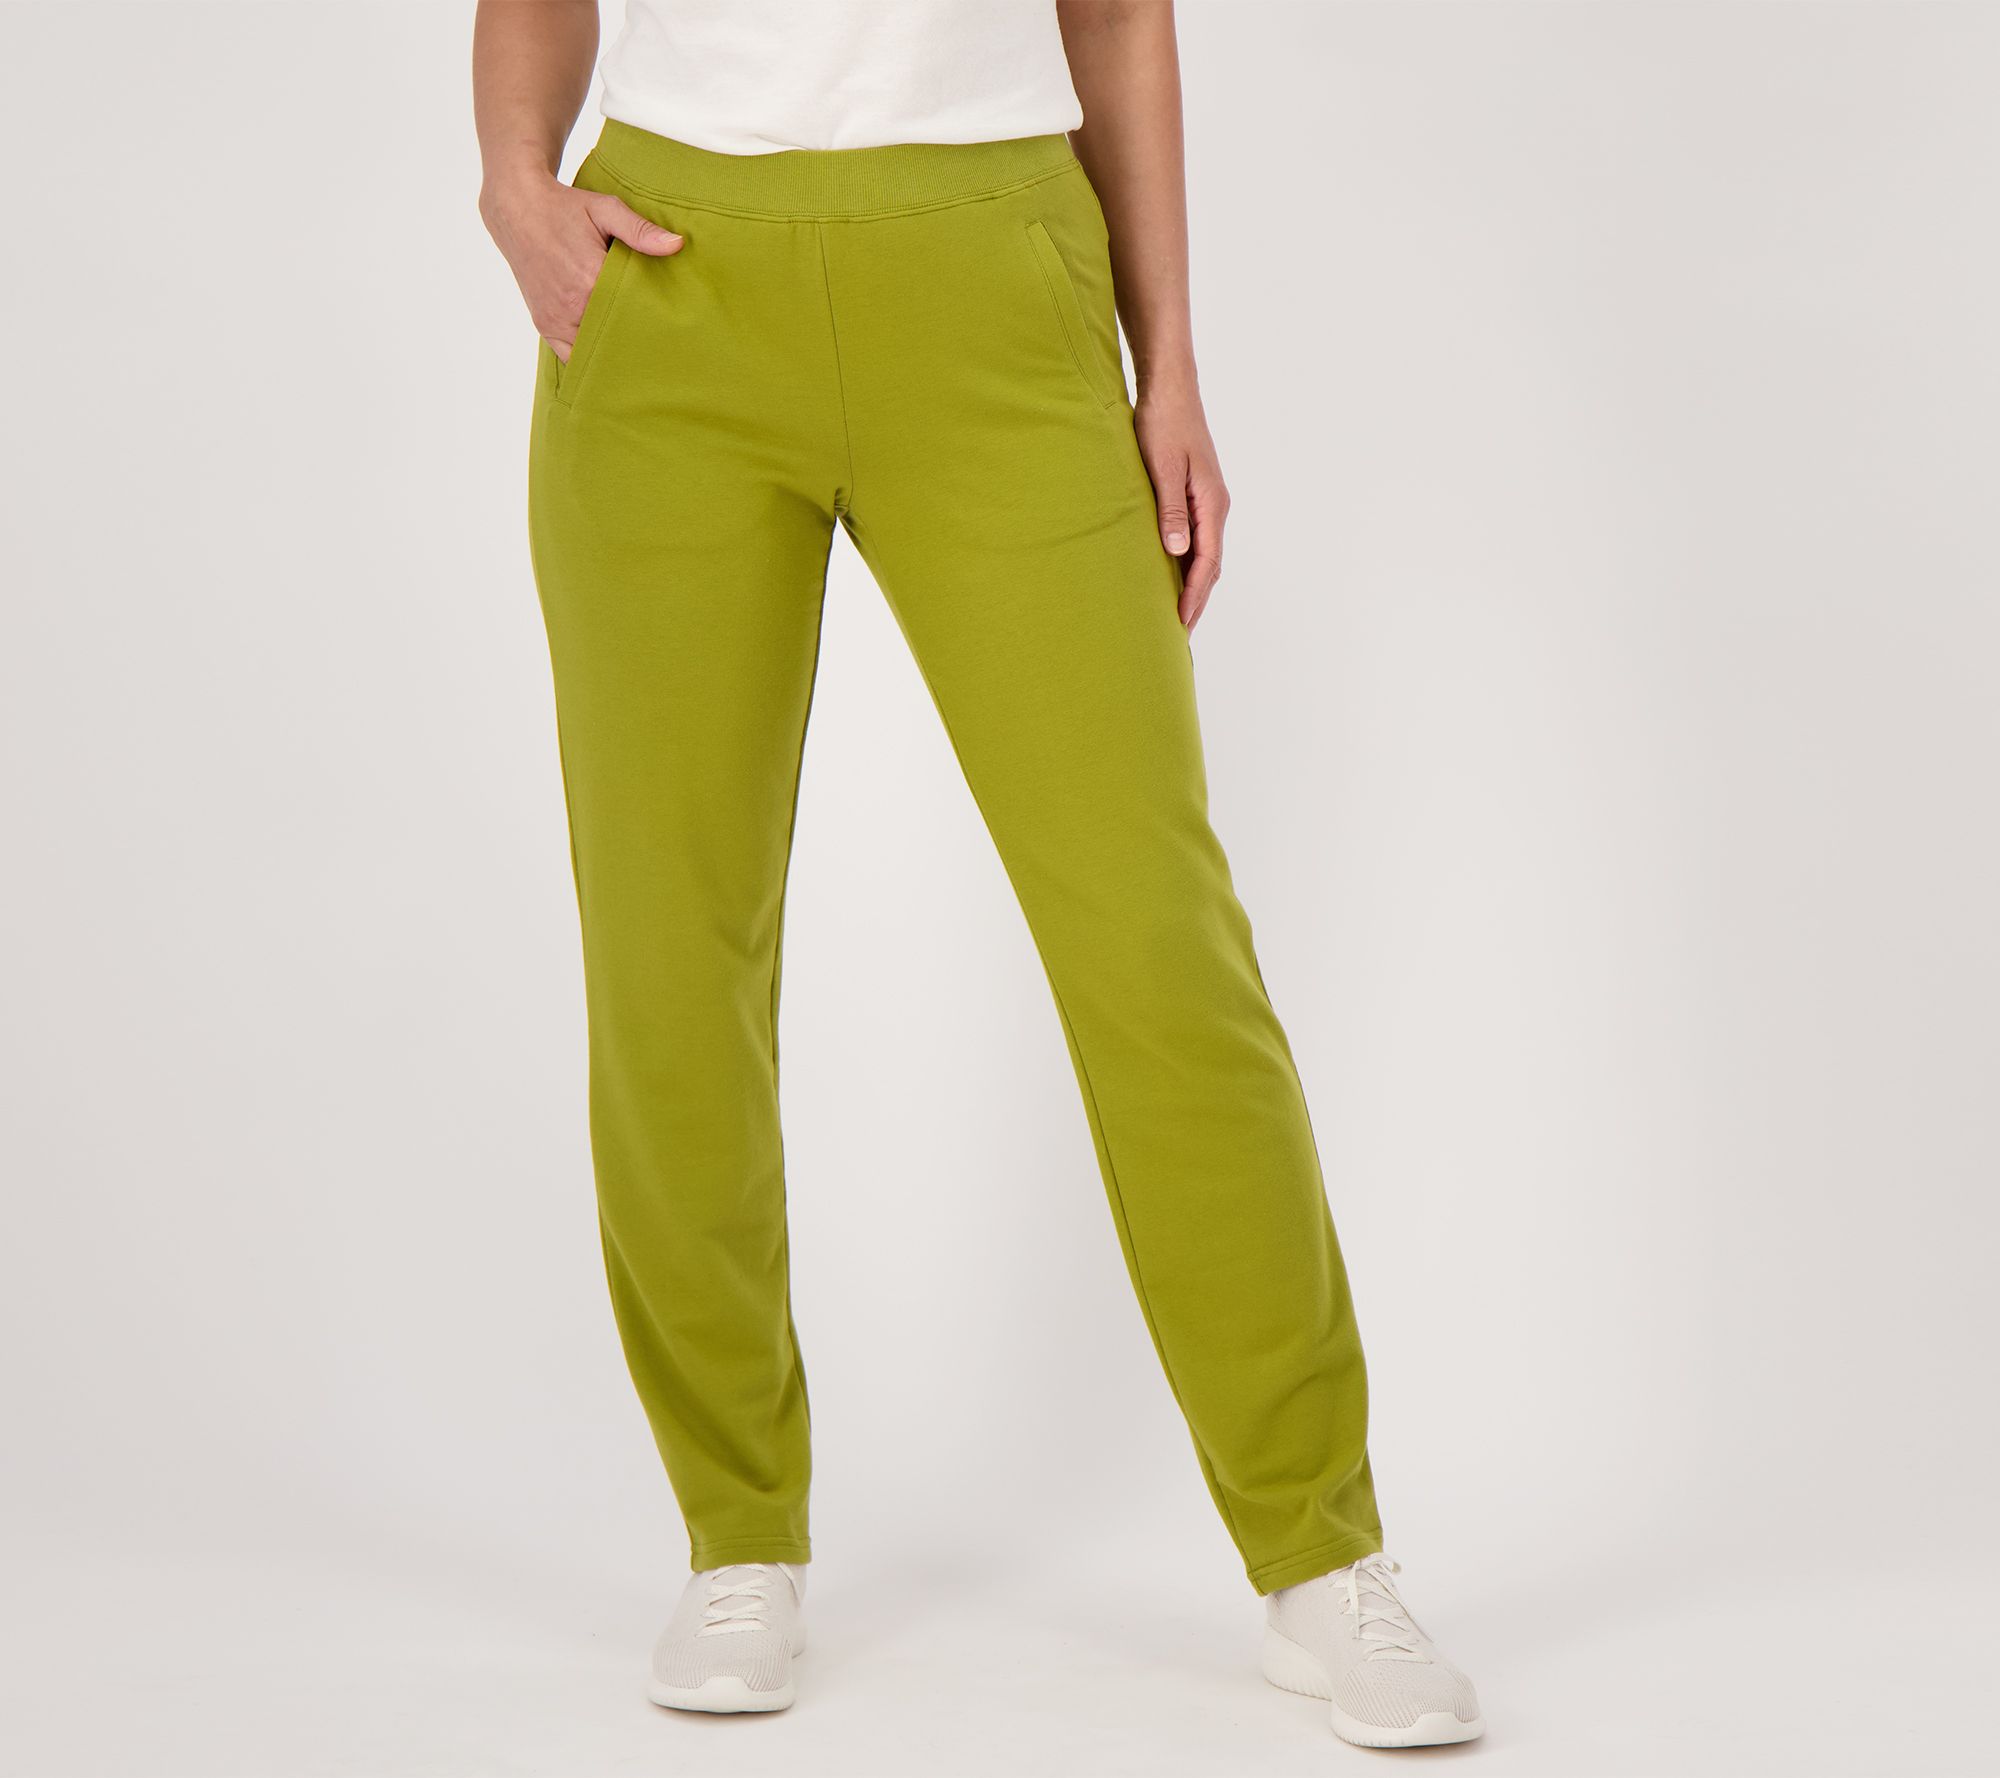 Buy Dollar Women's Missy Cotton Slim Fit Lime and Baked Apple